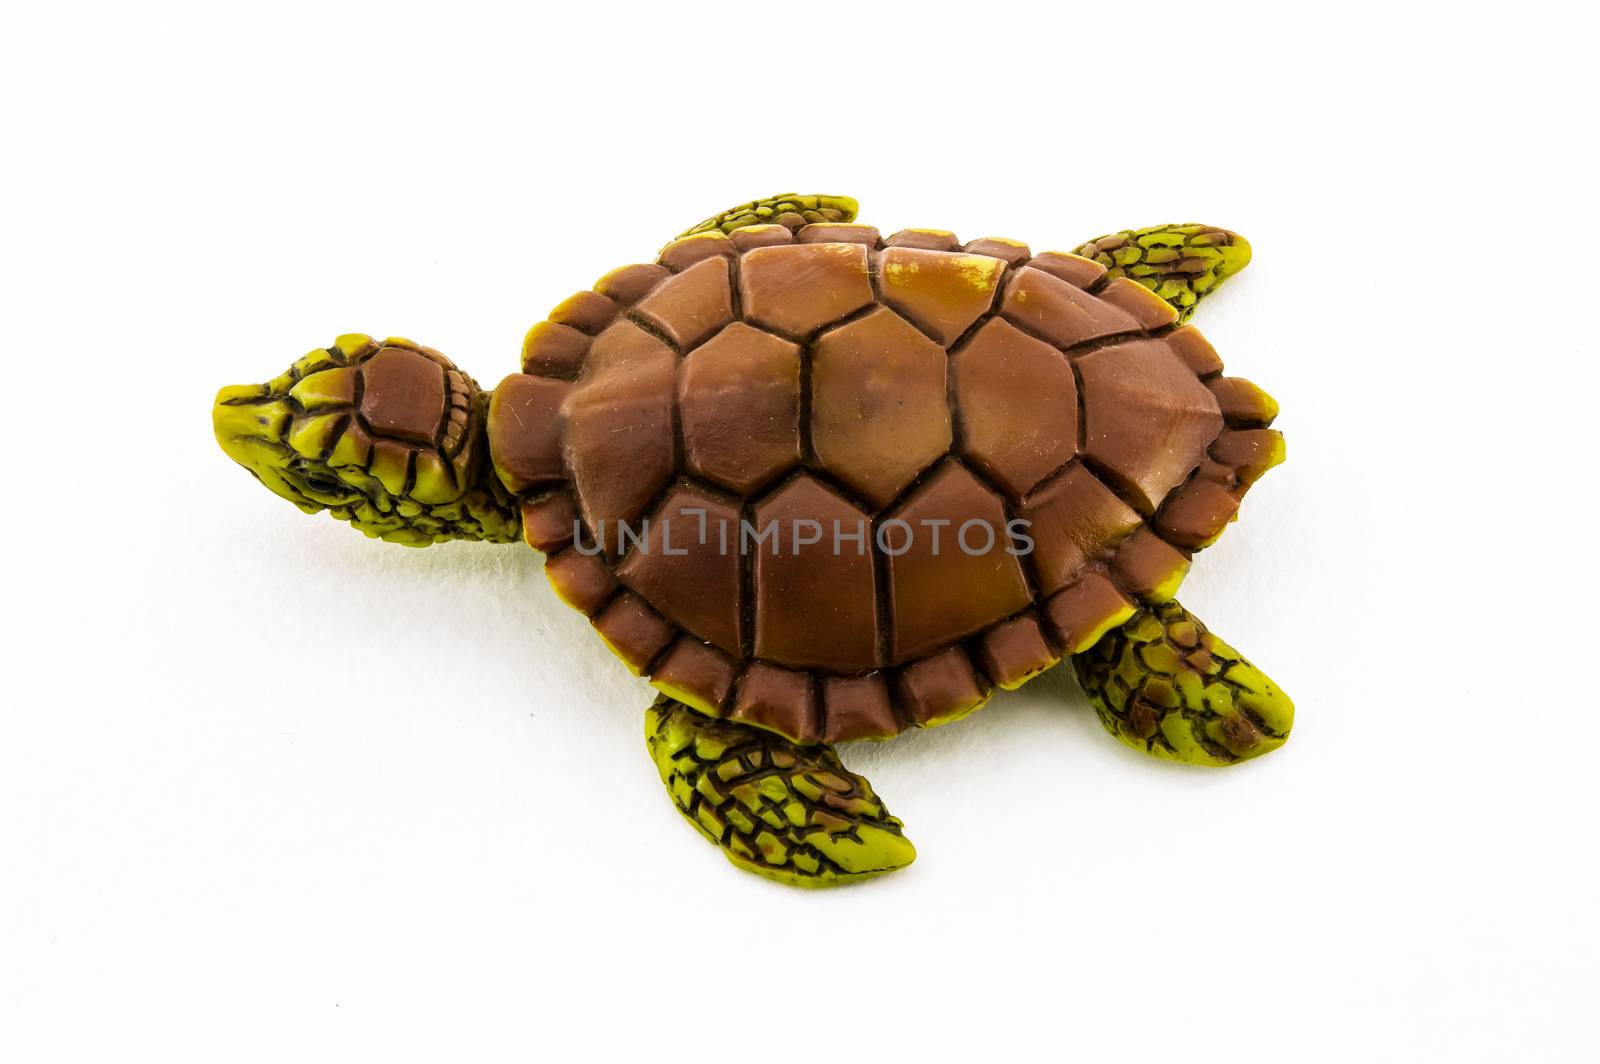 Little turtle figurine isolated on white backgrownd